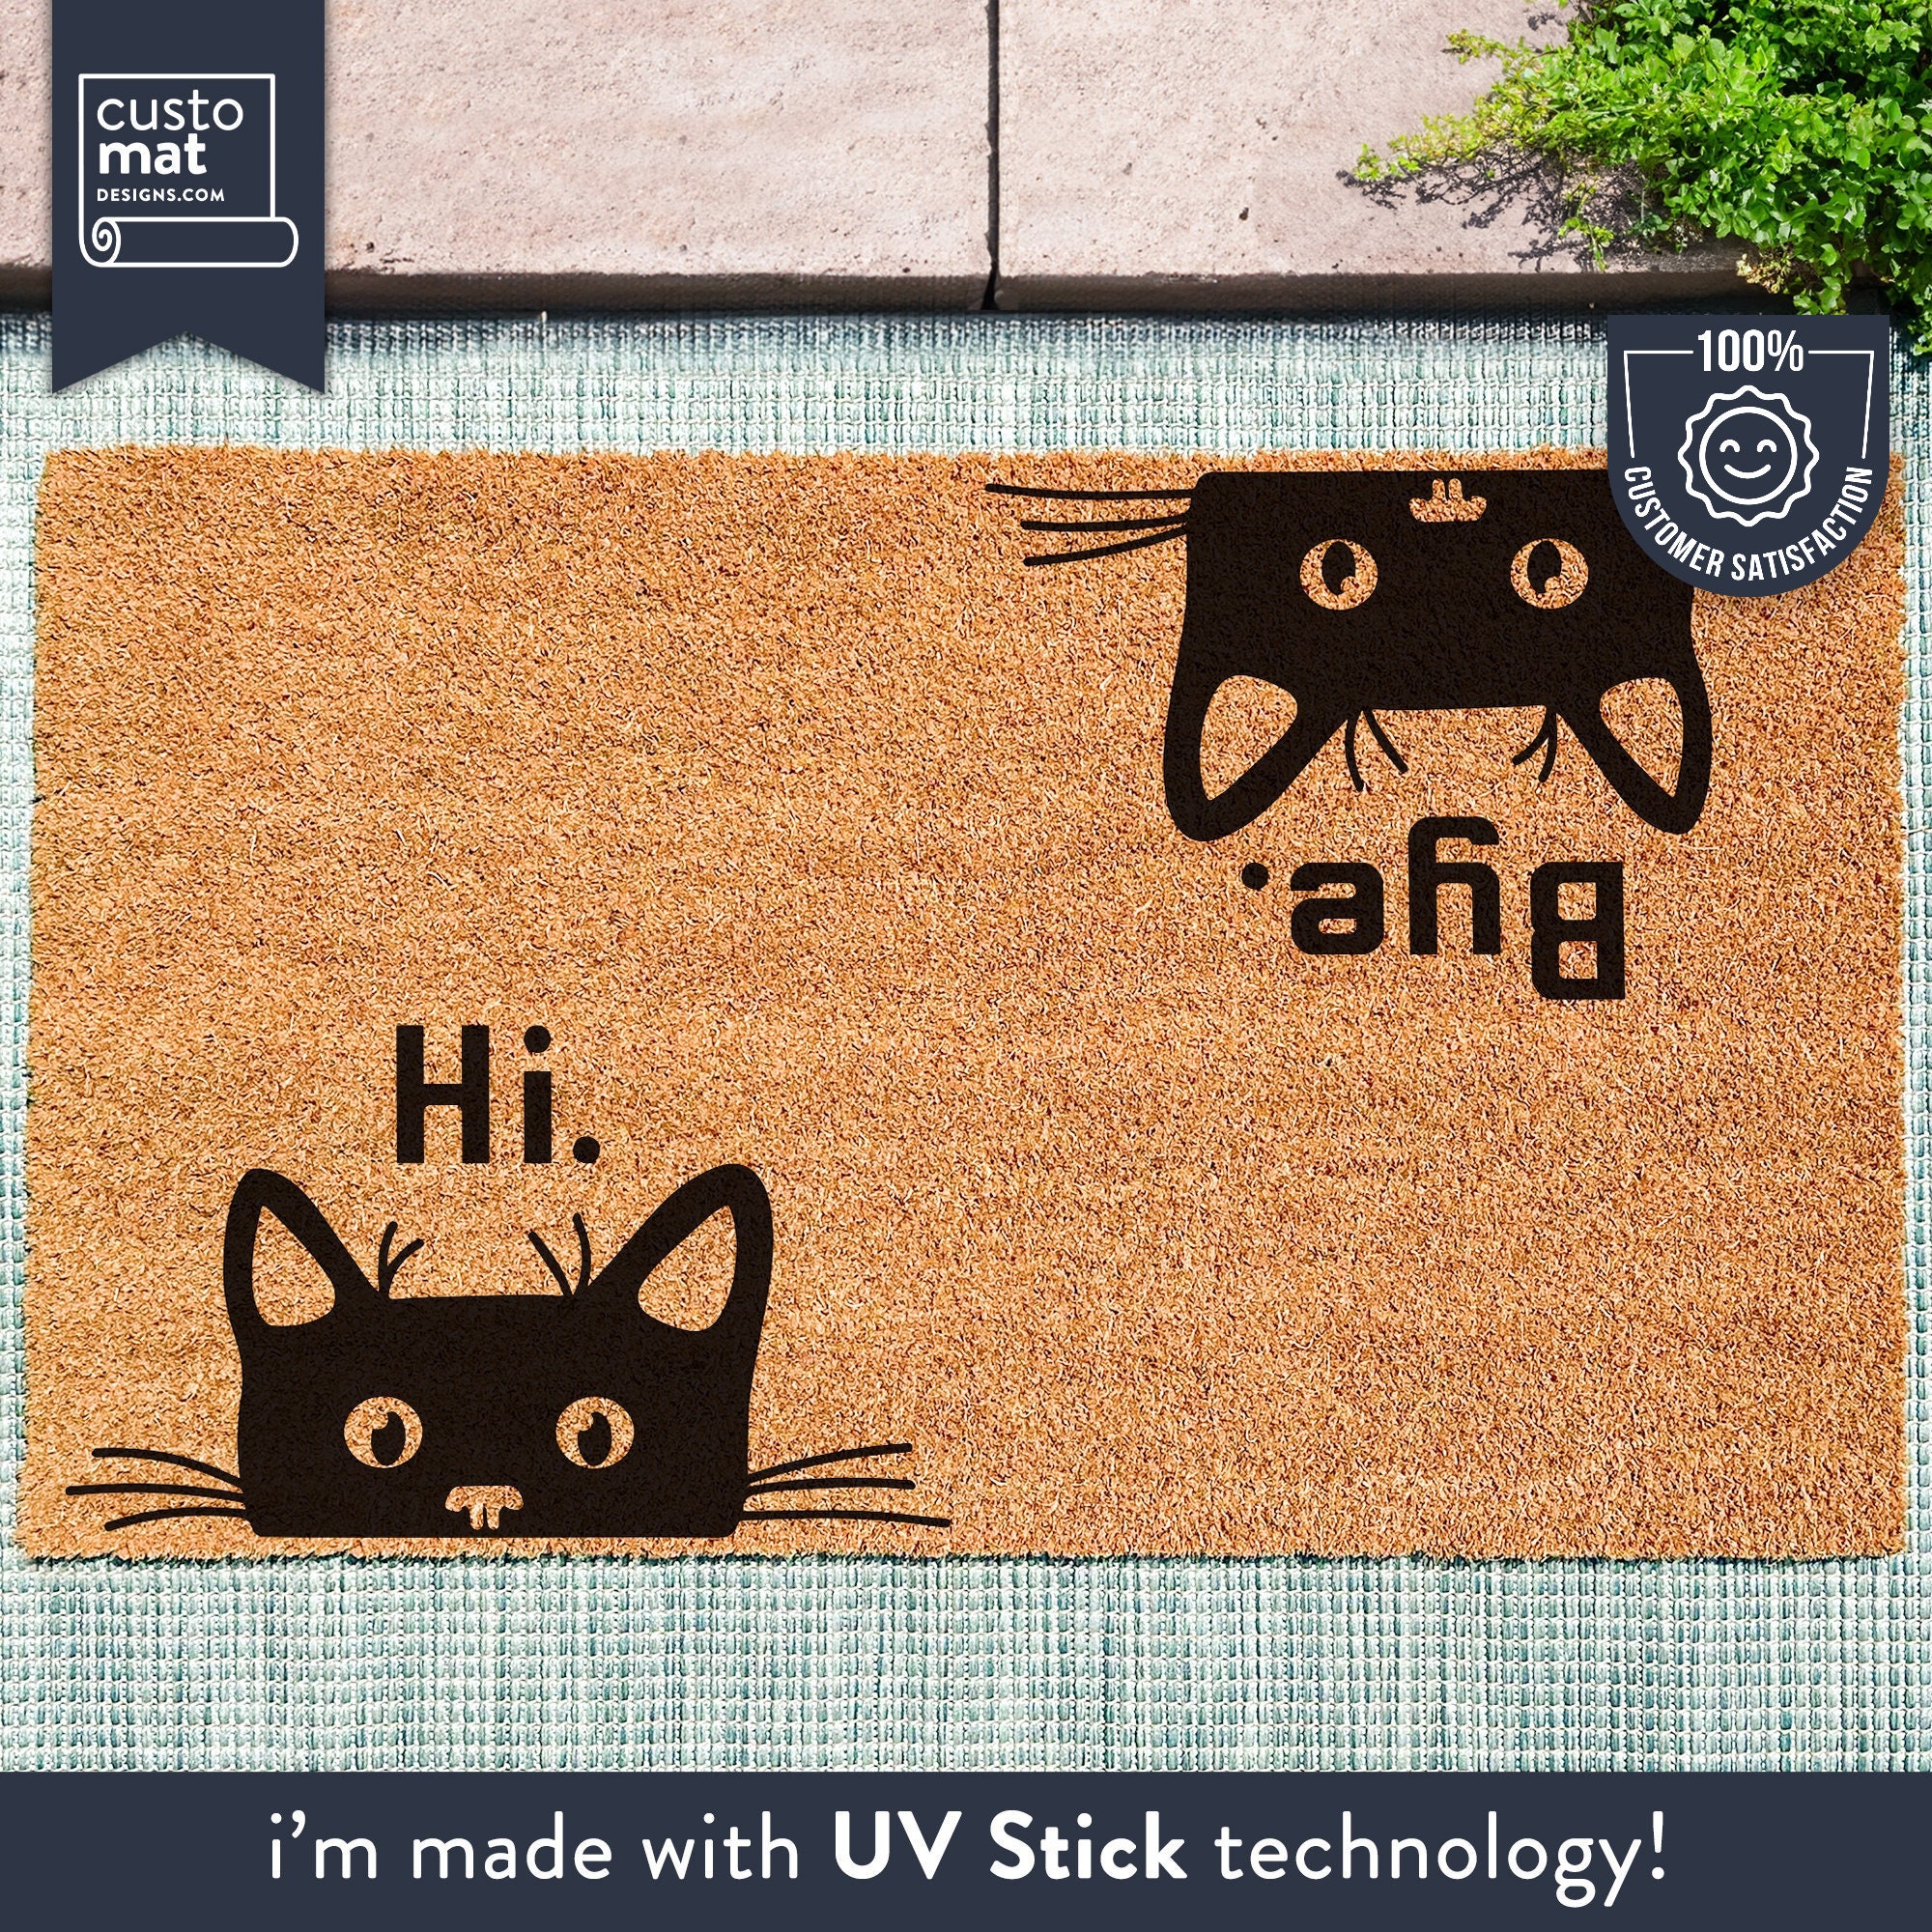 Keep In Mind When Visiting The House Cartoon Cat Welcome Doormats Home  Decoration Anti-slip Front